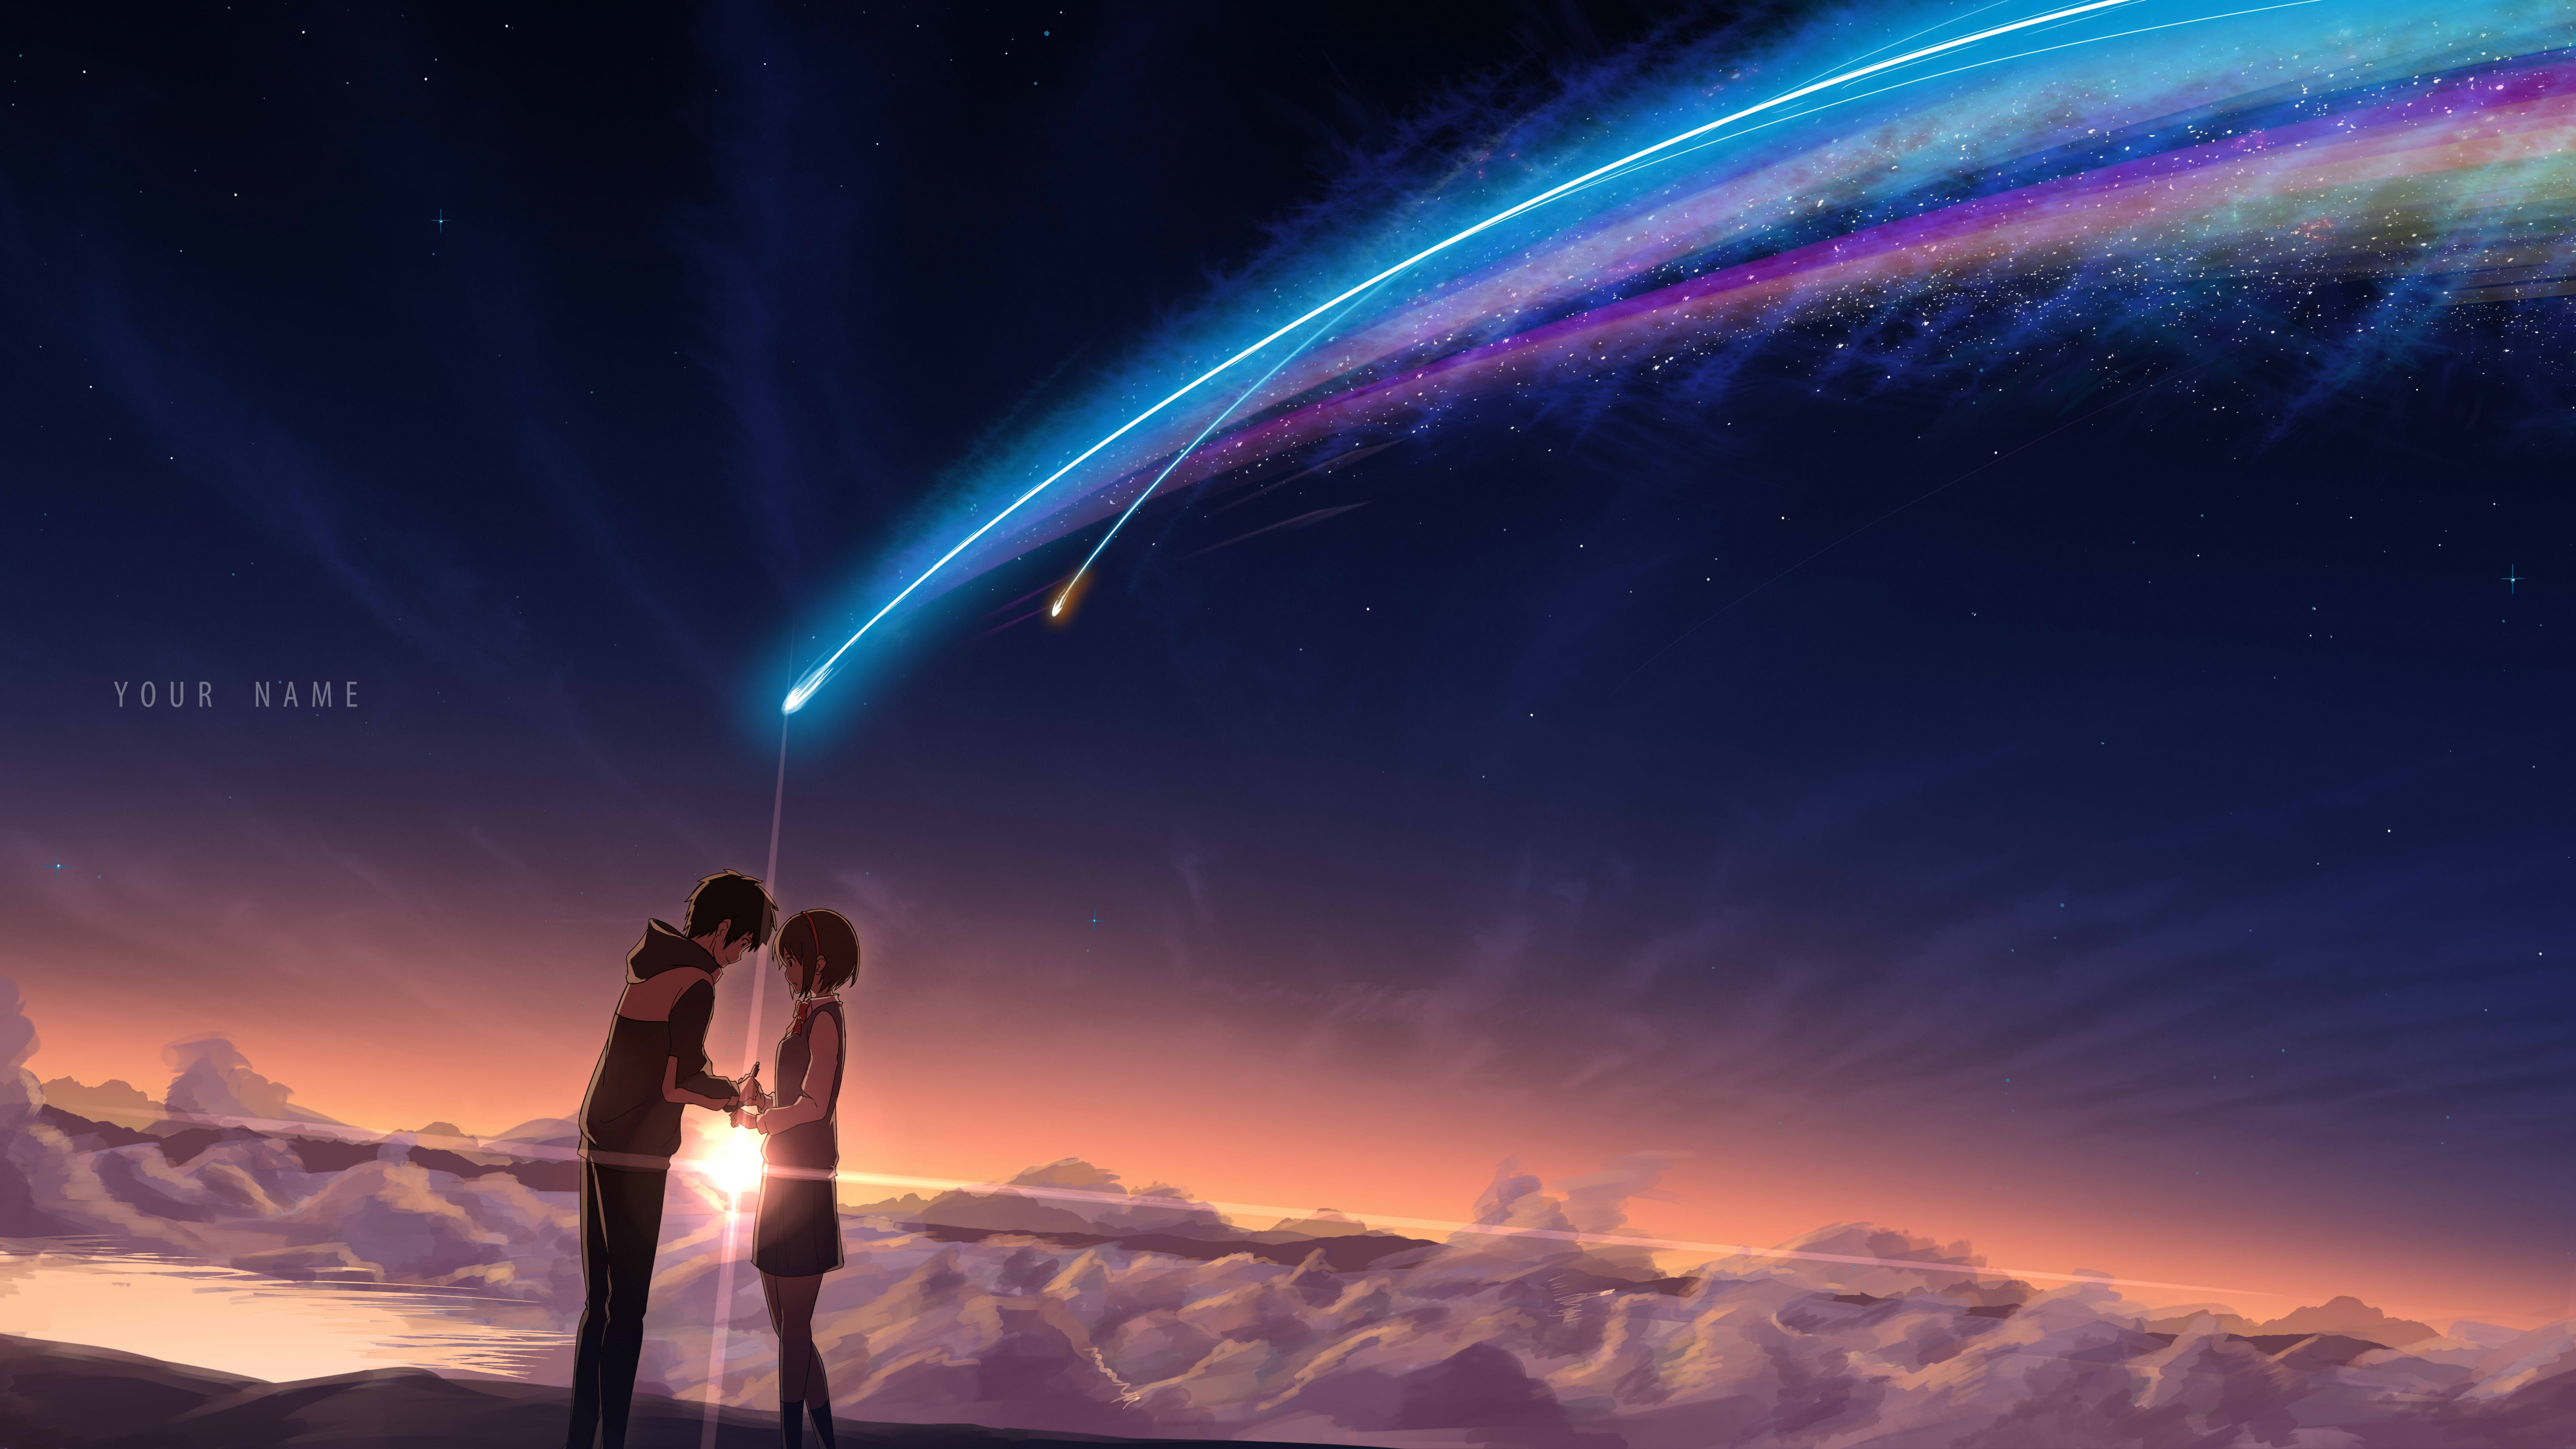 Wallpaper Your Name, anime, best animation movies, Movies #13200